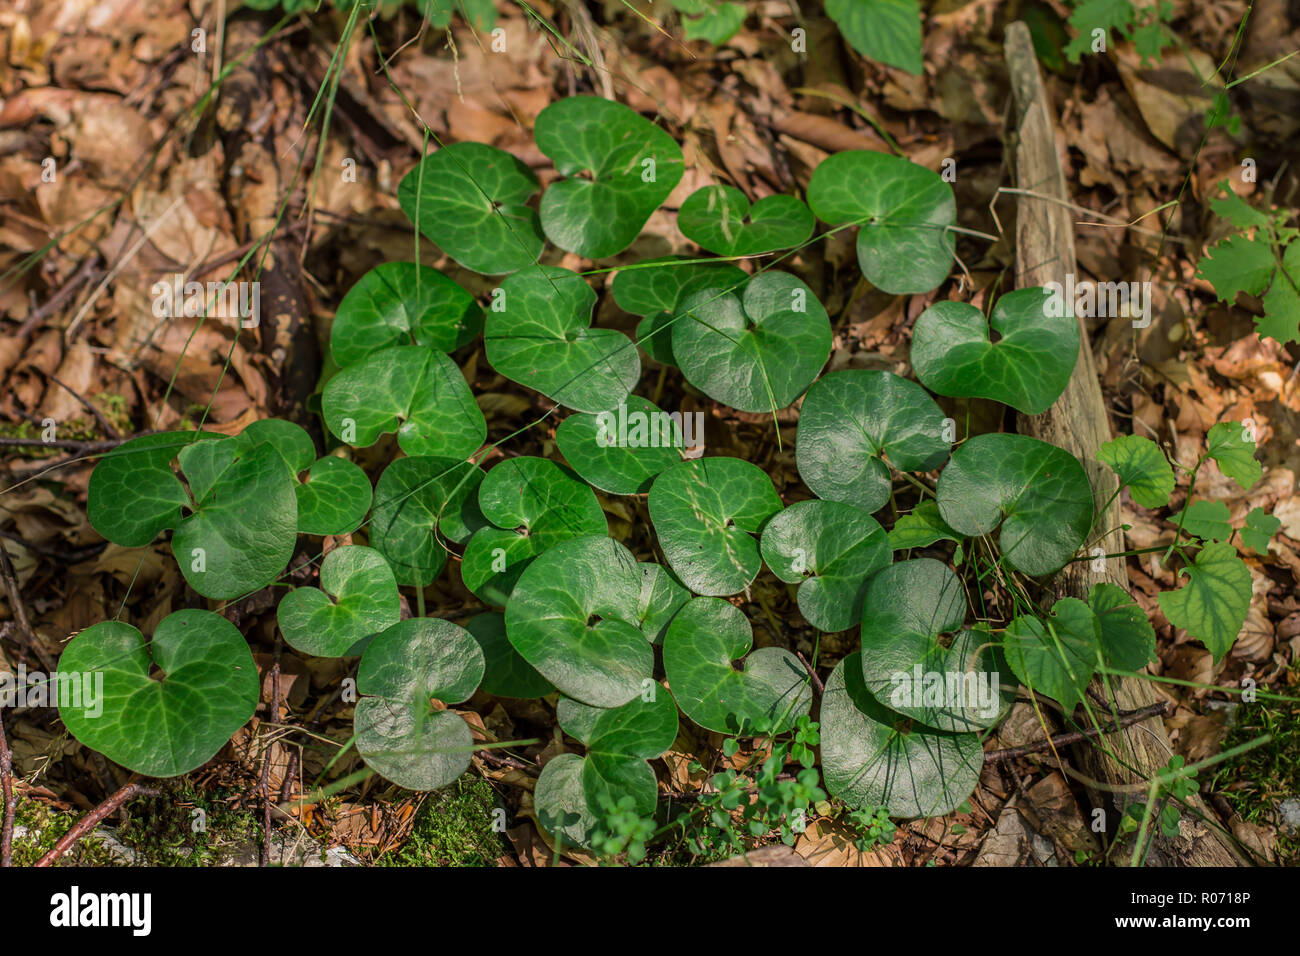 Dark green leaves of the asarabacca - latine name Asarum europaeum in the beech forest on the Tara mountain in Serbia Stock Photo